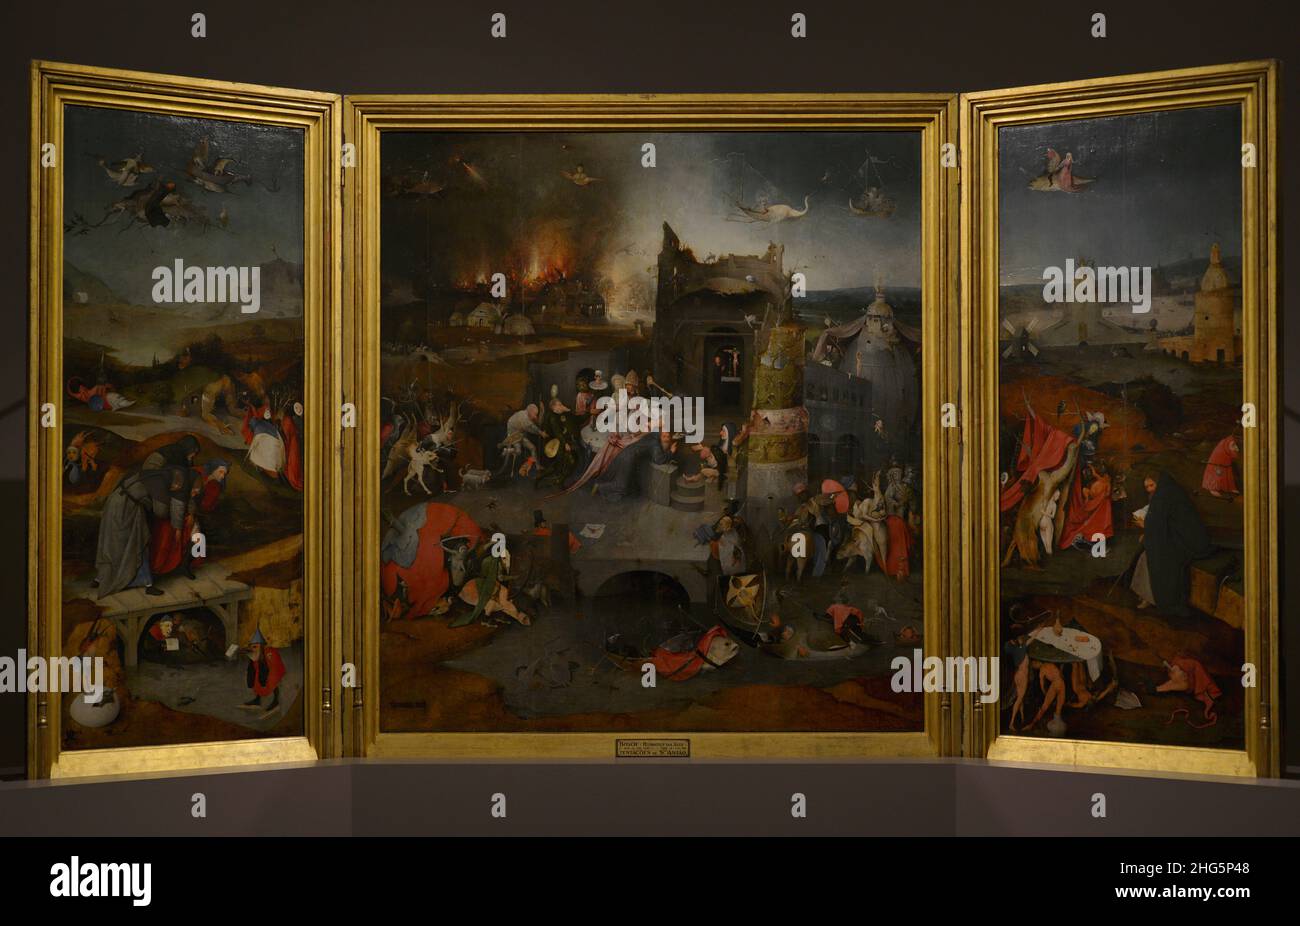 Hieronymus Bosch (1450-1516). Netherlandish painter. Triptych of the Temptations of Saint Anthony, 1498. Fly and Fall of St Anthony (left), The Temptation of St. Athony (center) and Contemplation of St. Anthony (right). National Museum of Ancient Art. Lisbon, Portugal. Stock Photo